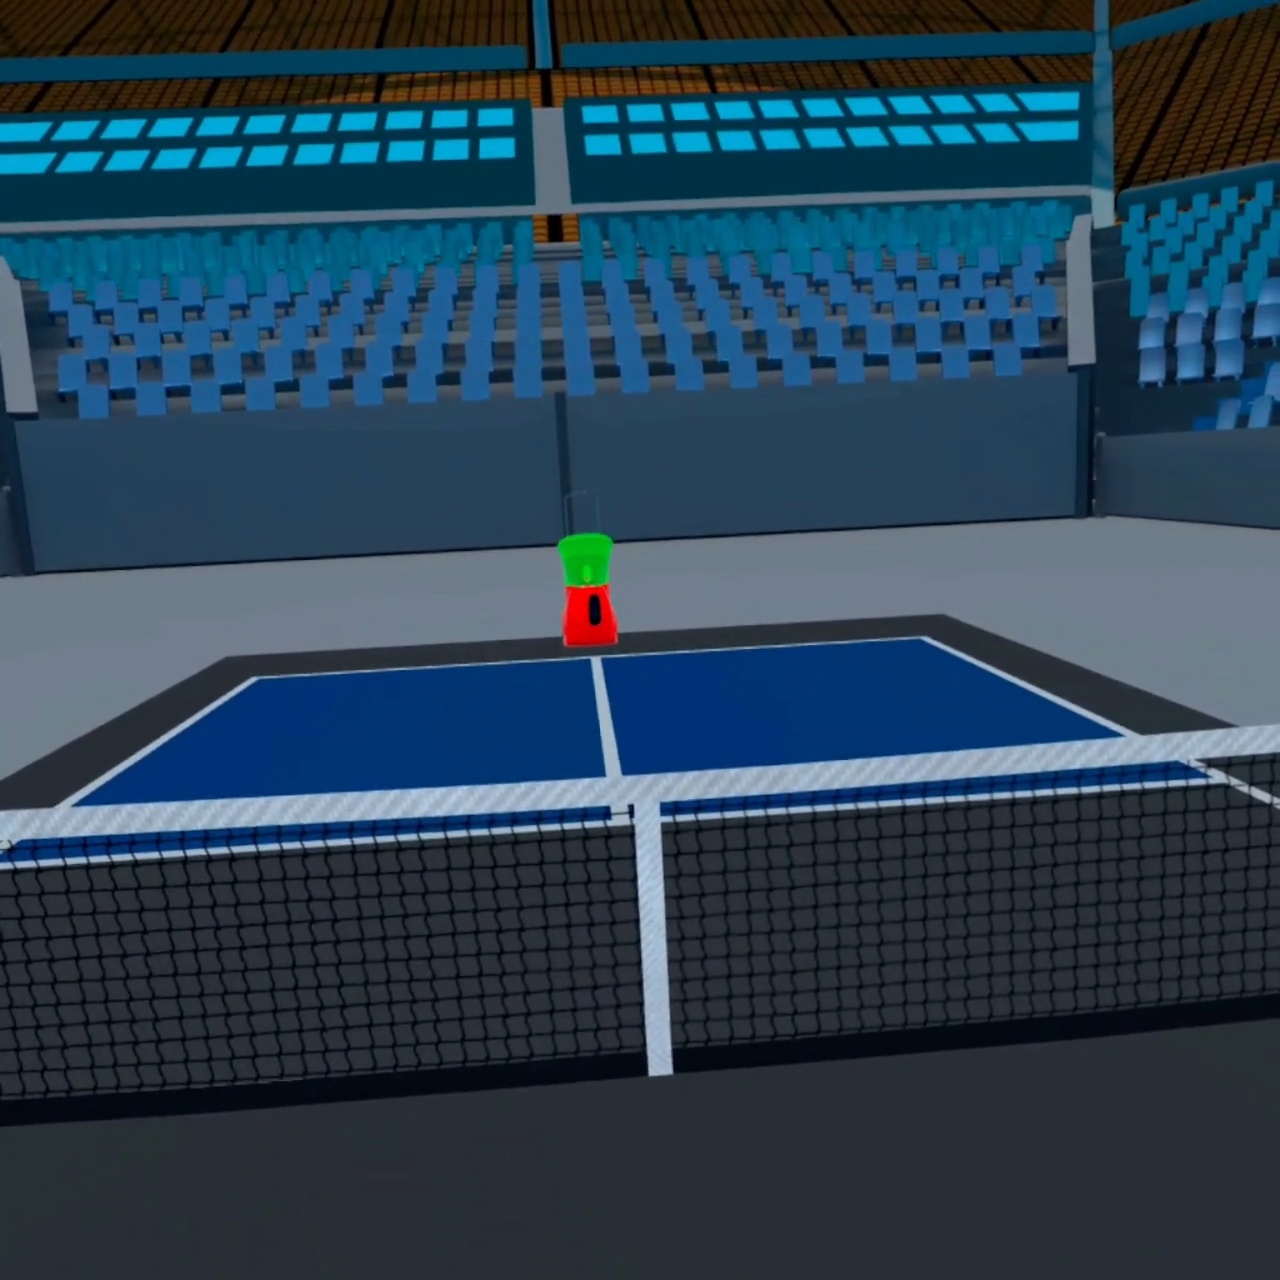 Playin Pickleball - In Game image of player at the net.